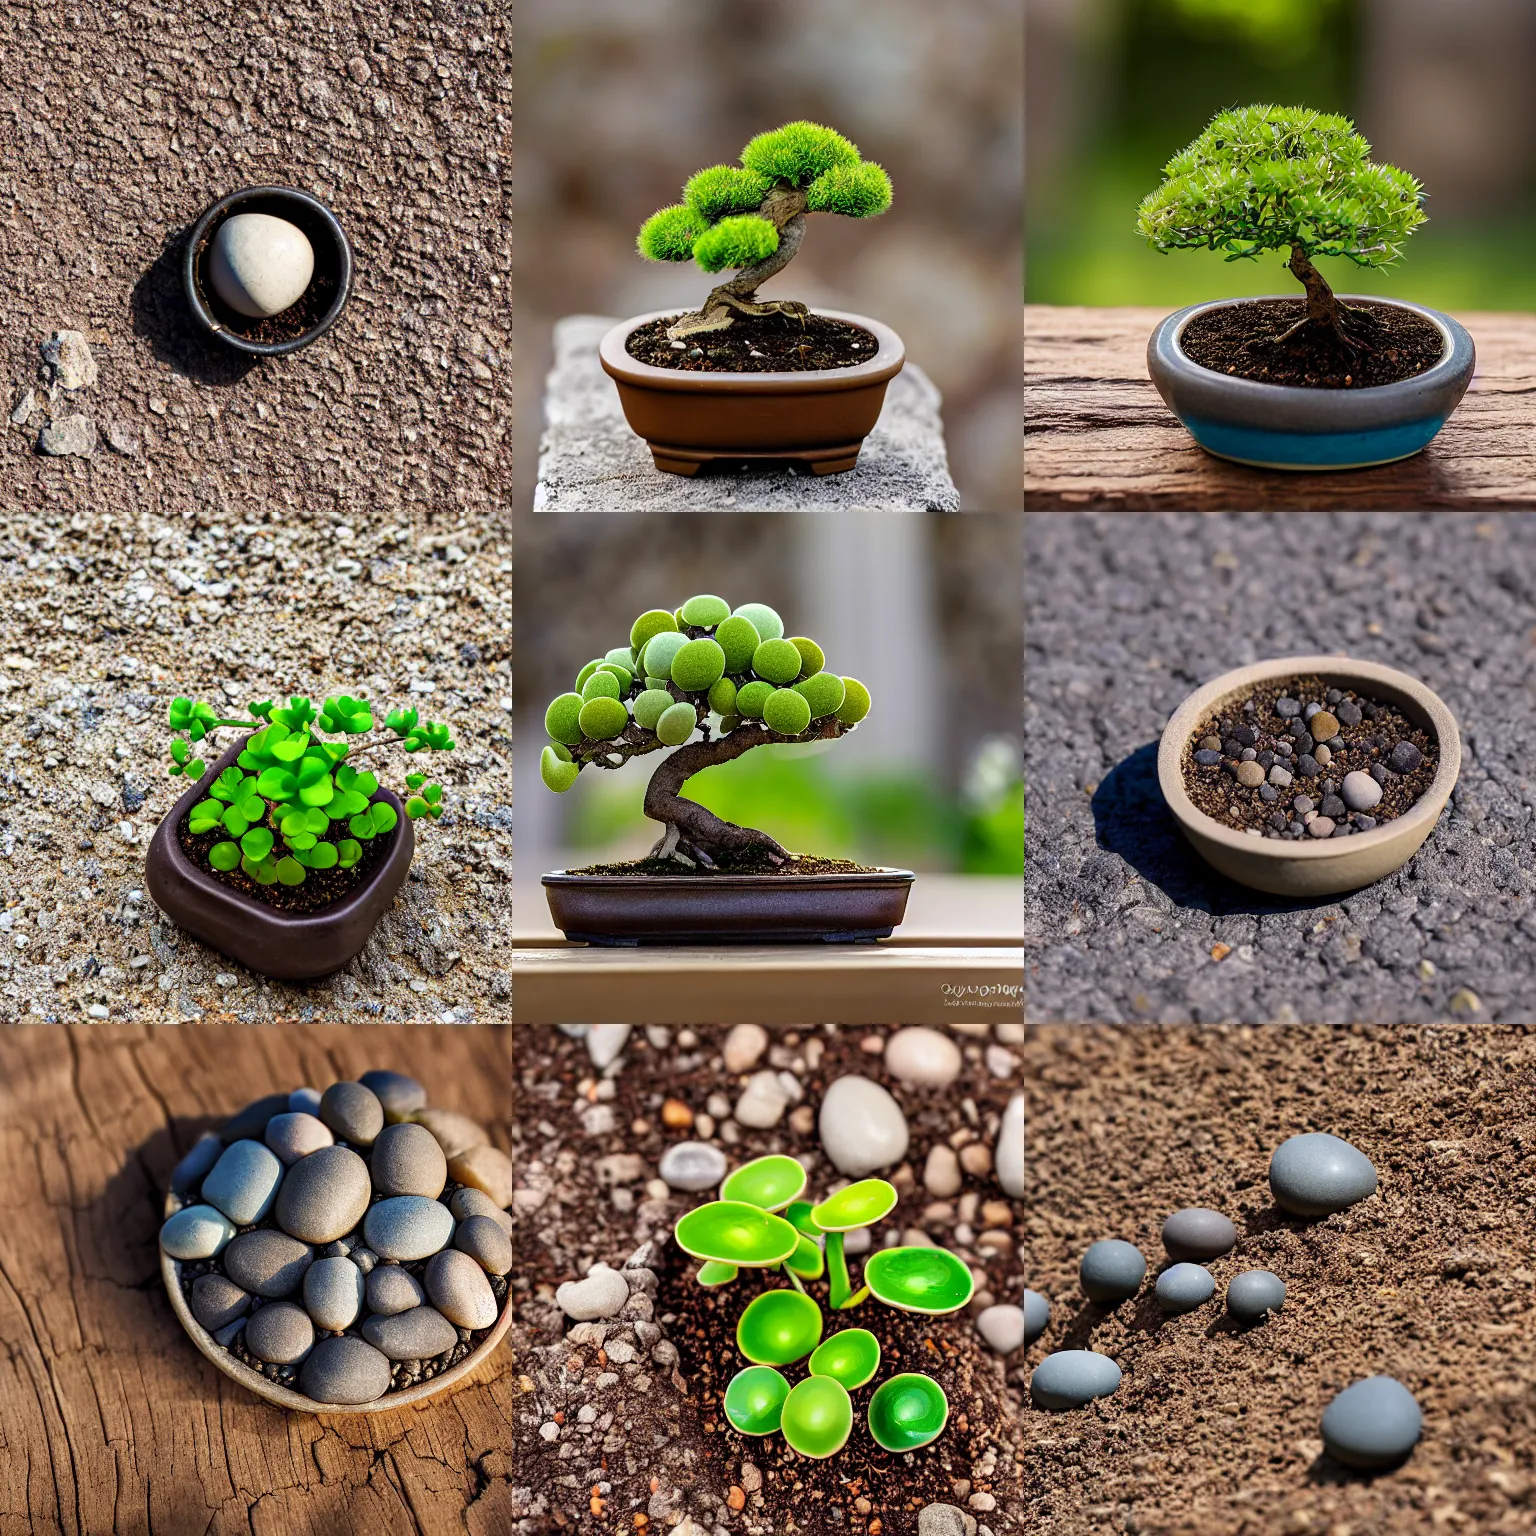 Prompt: Bonsai lithops pebble plant in training since 1724, photograph from the national arboretum, white stone wall background, sitting outdoors on a wooden table, Canon EOS R3, f/1.4, ISO 200, 1/160s, 8K